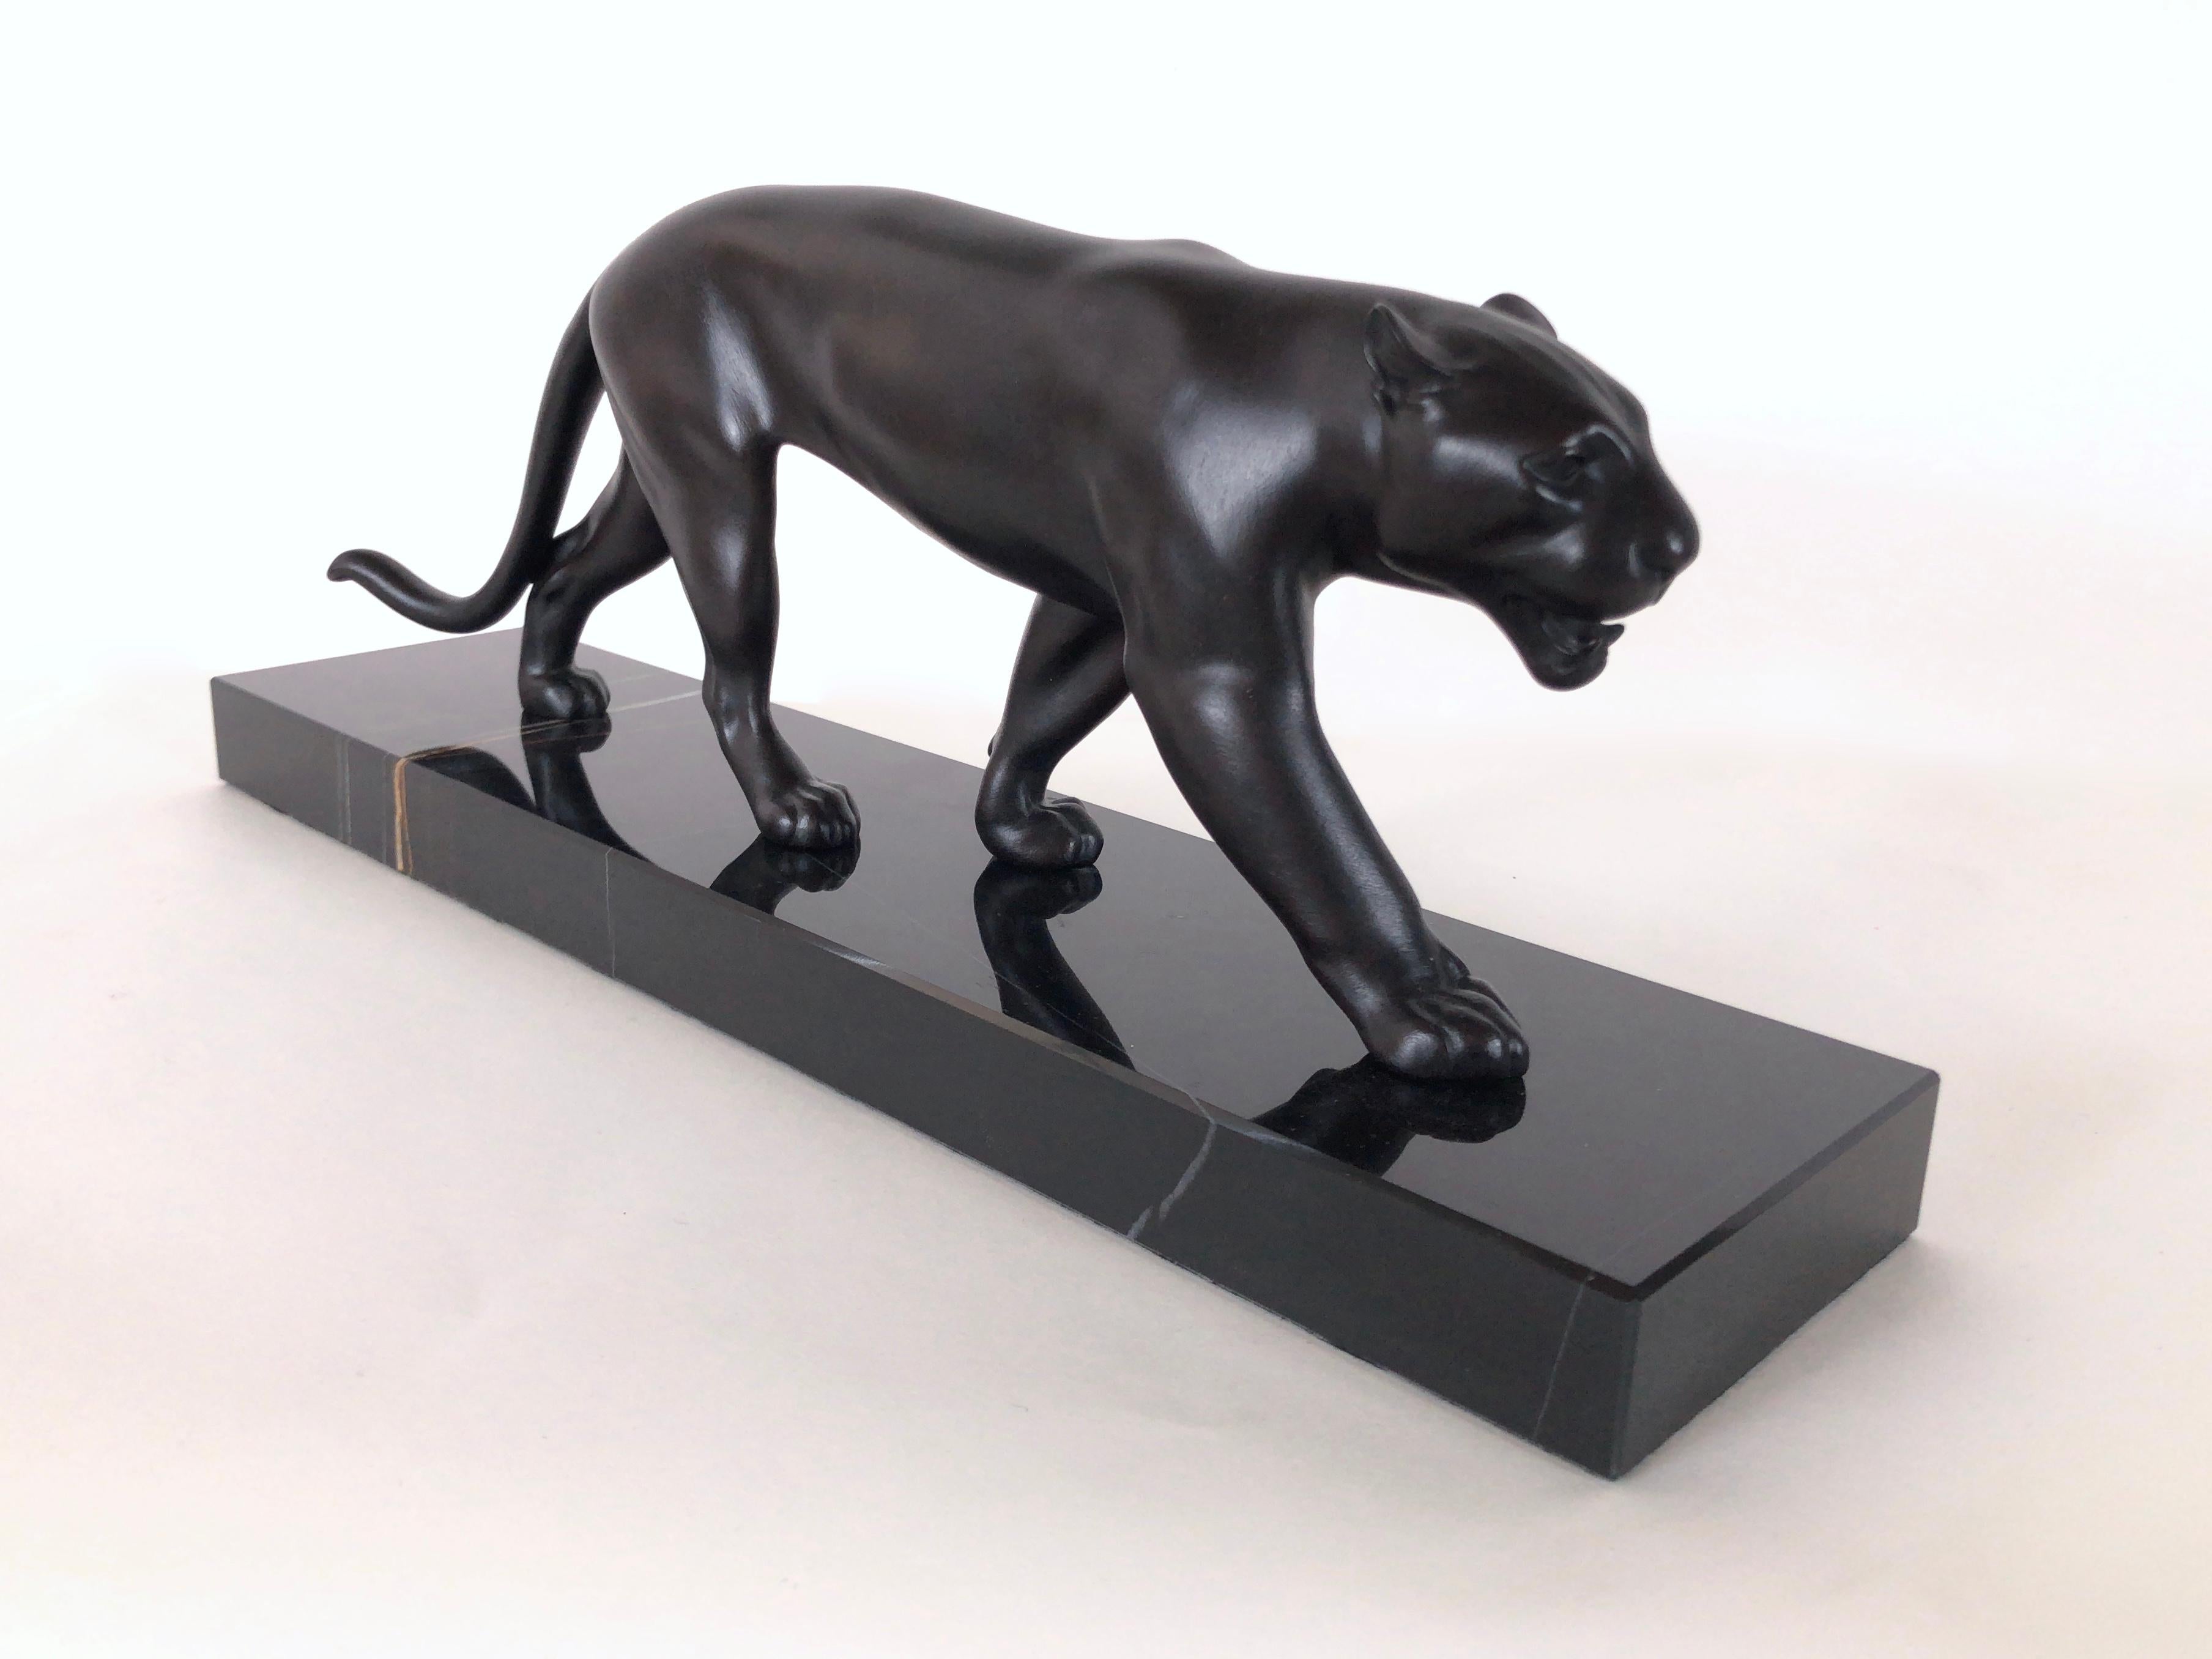 Lion / panther sculpture named “Ouganda”
Original “Max Le Verrier”, signed
Designed in France during the roaring 1920s by “Max Le Verrier” (1891-1973)
Art Deco style, France 

Sculpture made in “Régule” (spelter) 
Socle in black marble (could